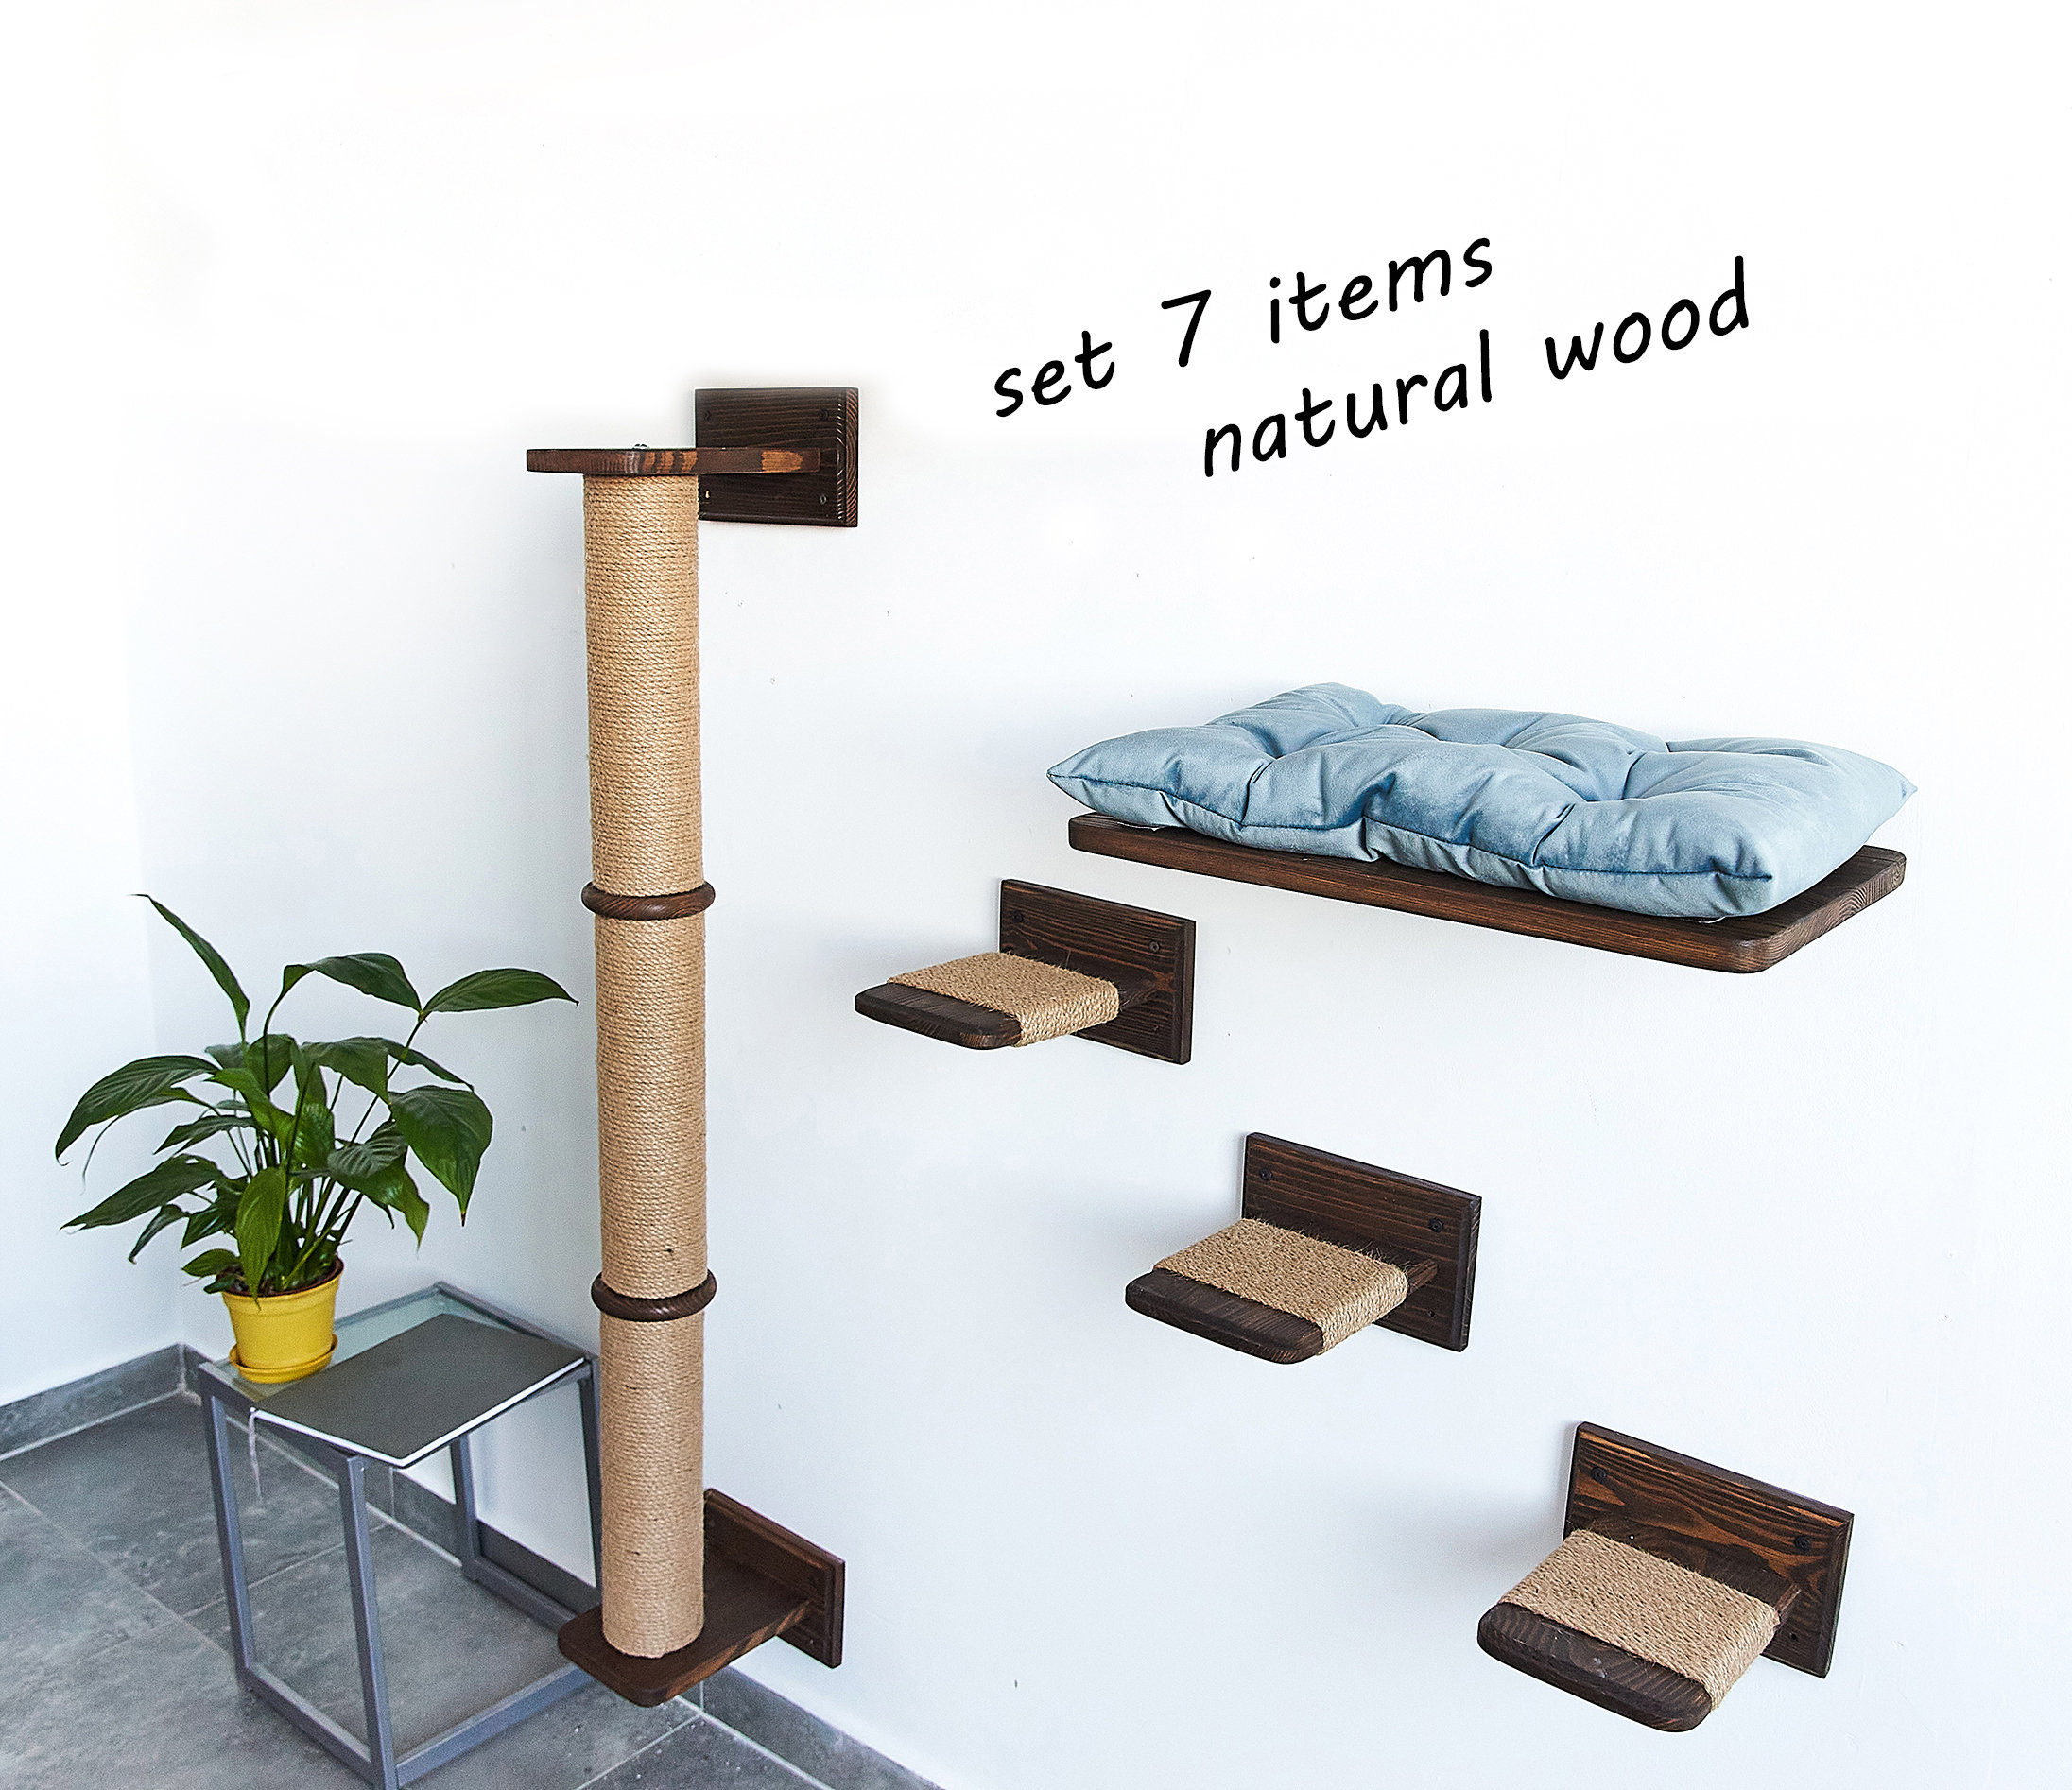 Climbing, shelves, pole & bed for cats